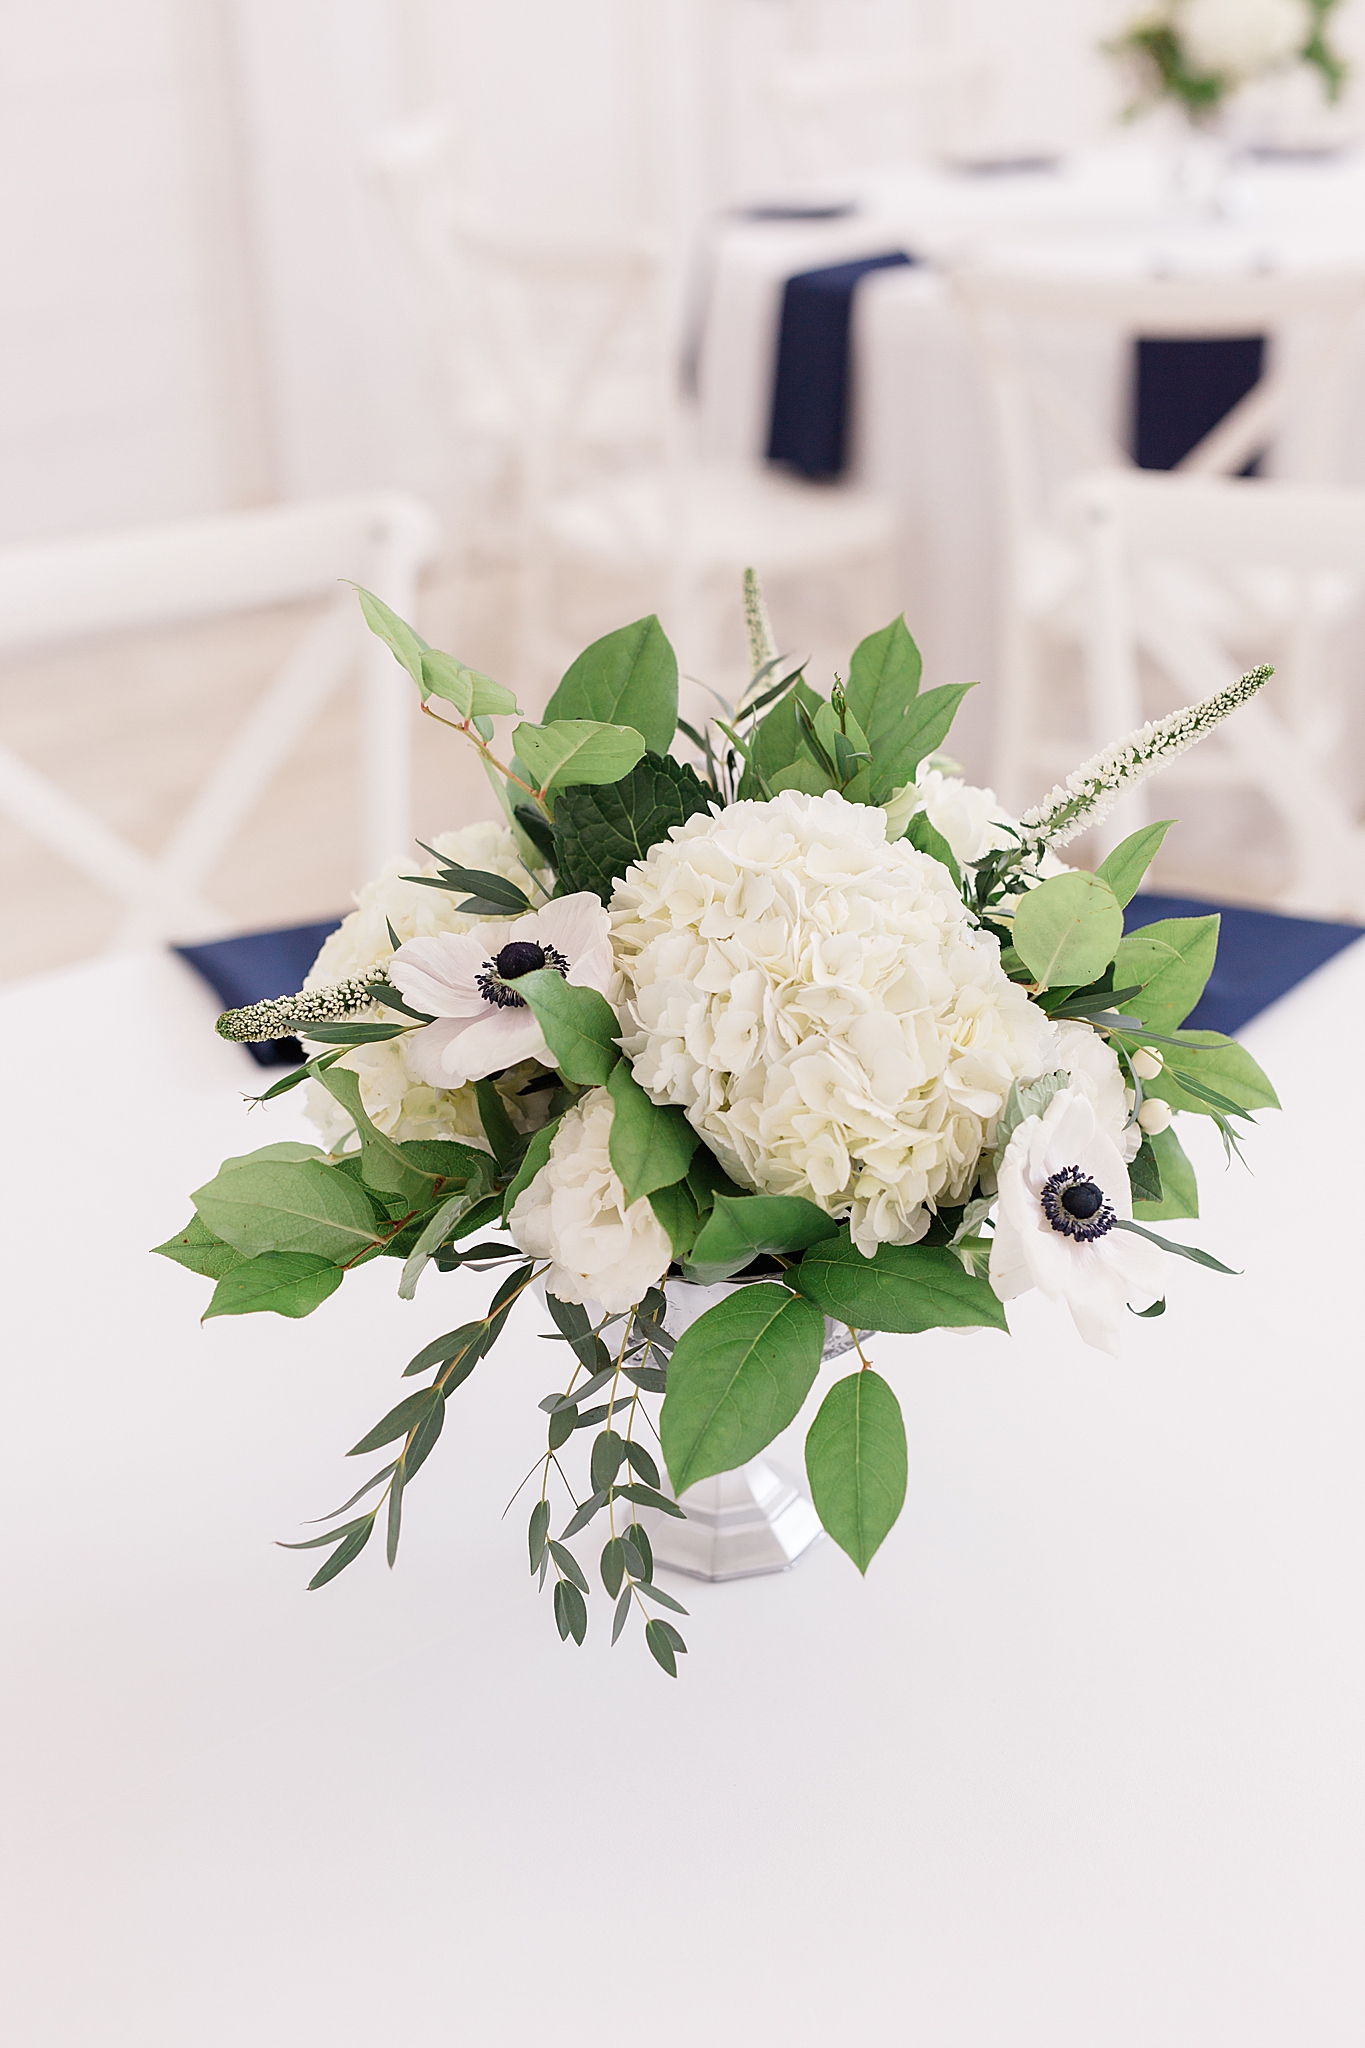 simple centerpieces with white flowers and blue accents